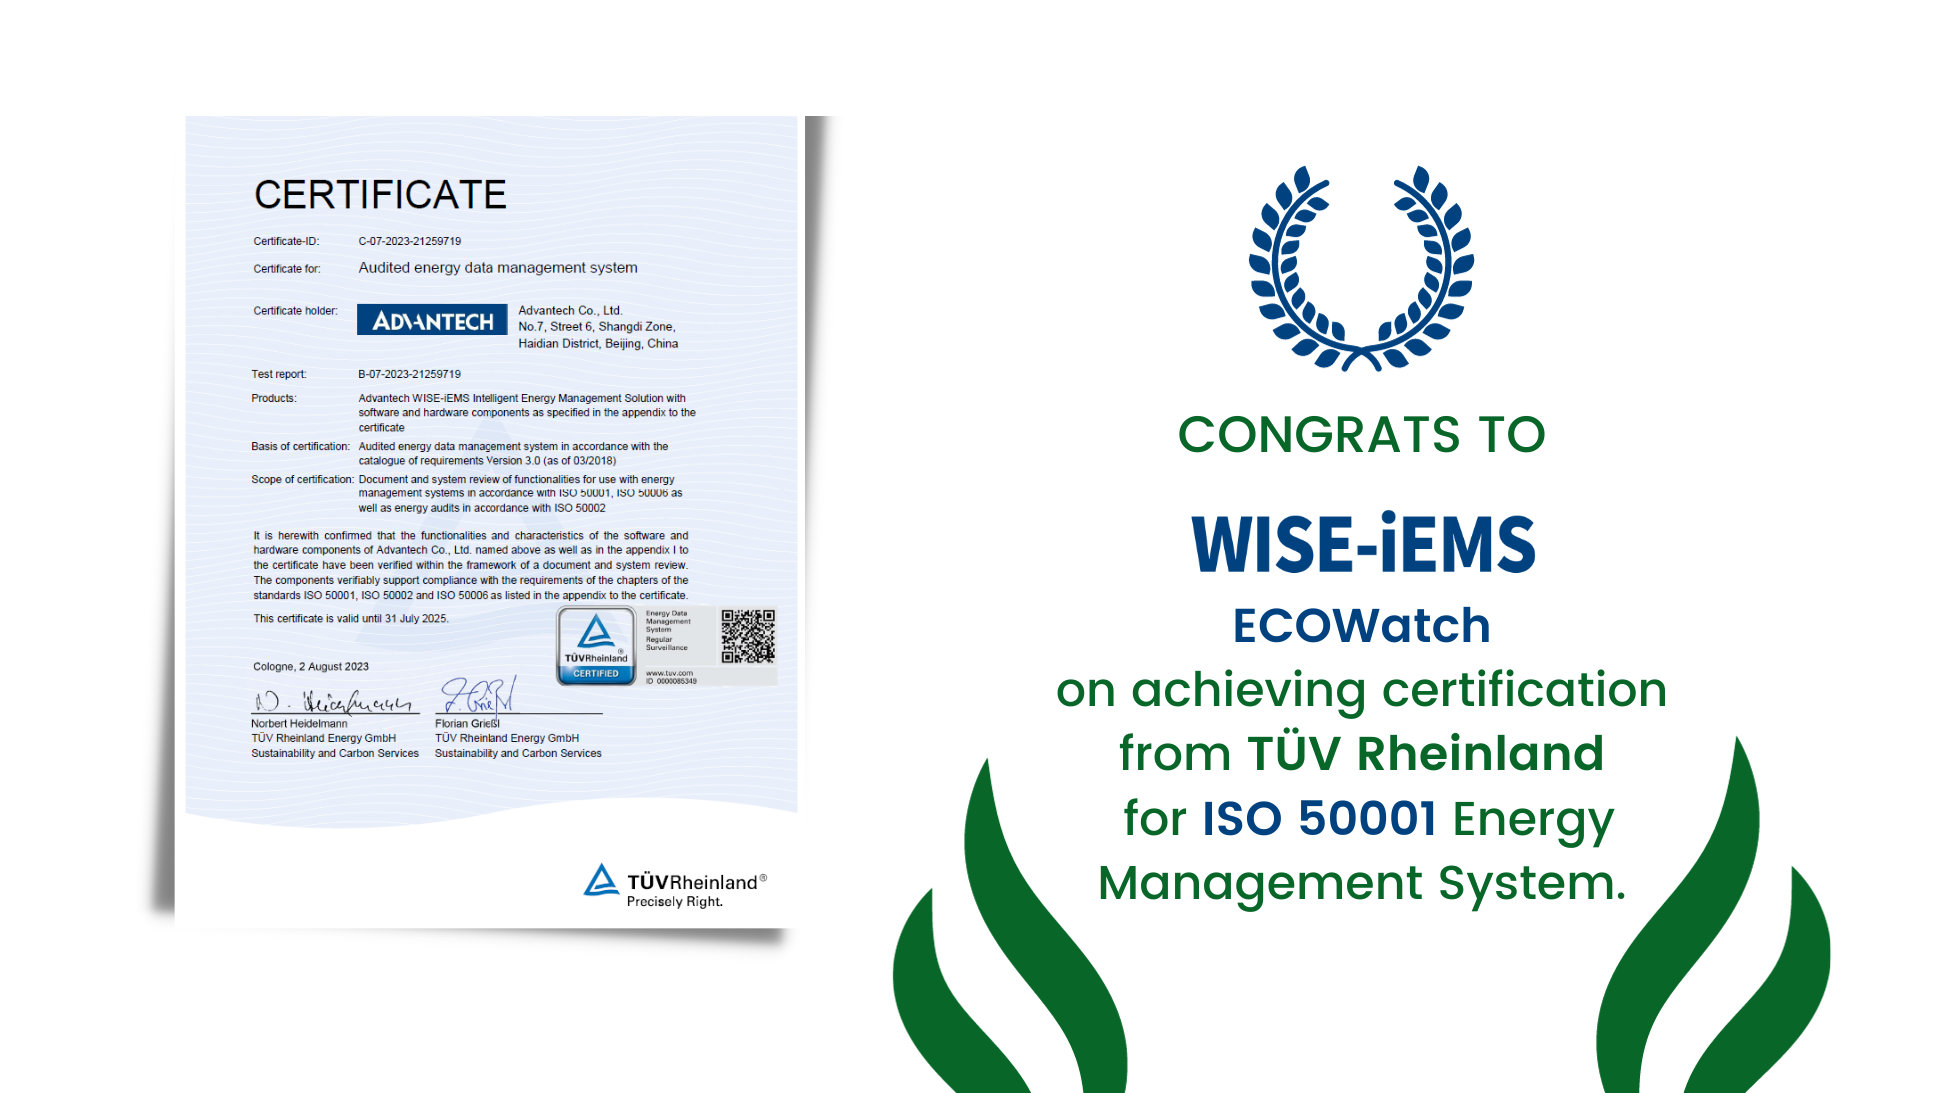 WISE-iEMS ECOWatch has been certified by TÜV Rheinland to meet the ISO50001 standard